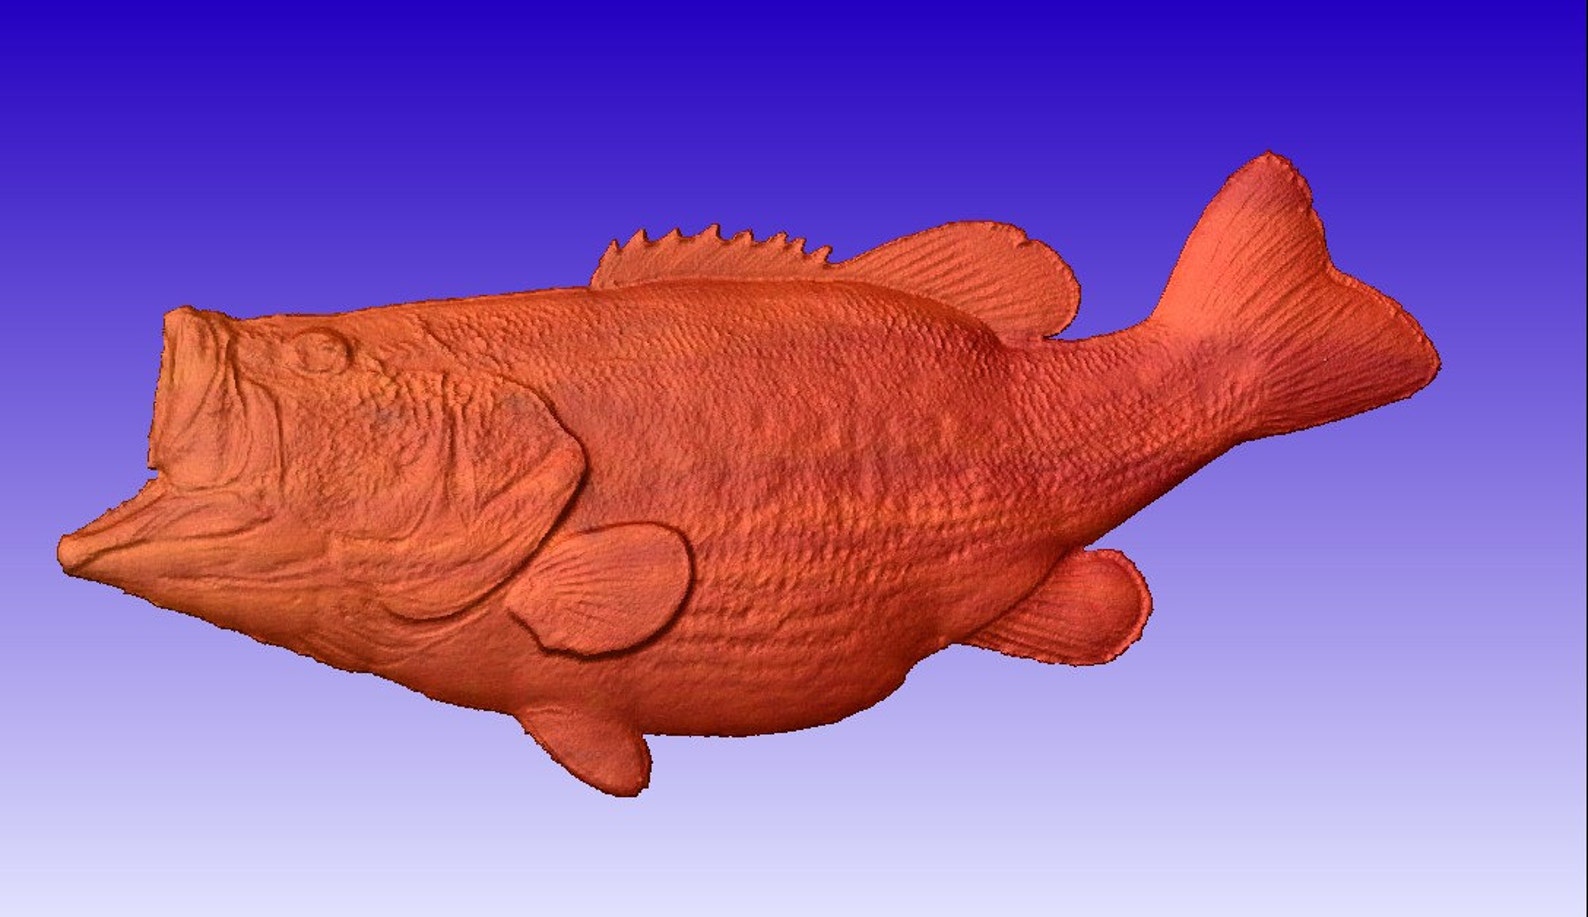 Download Bass Fish 3d Vector Art for cnc projects or carving ...